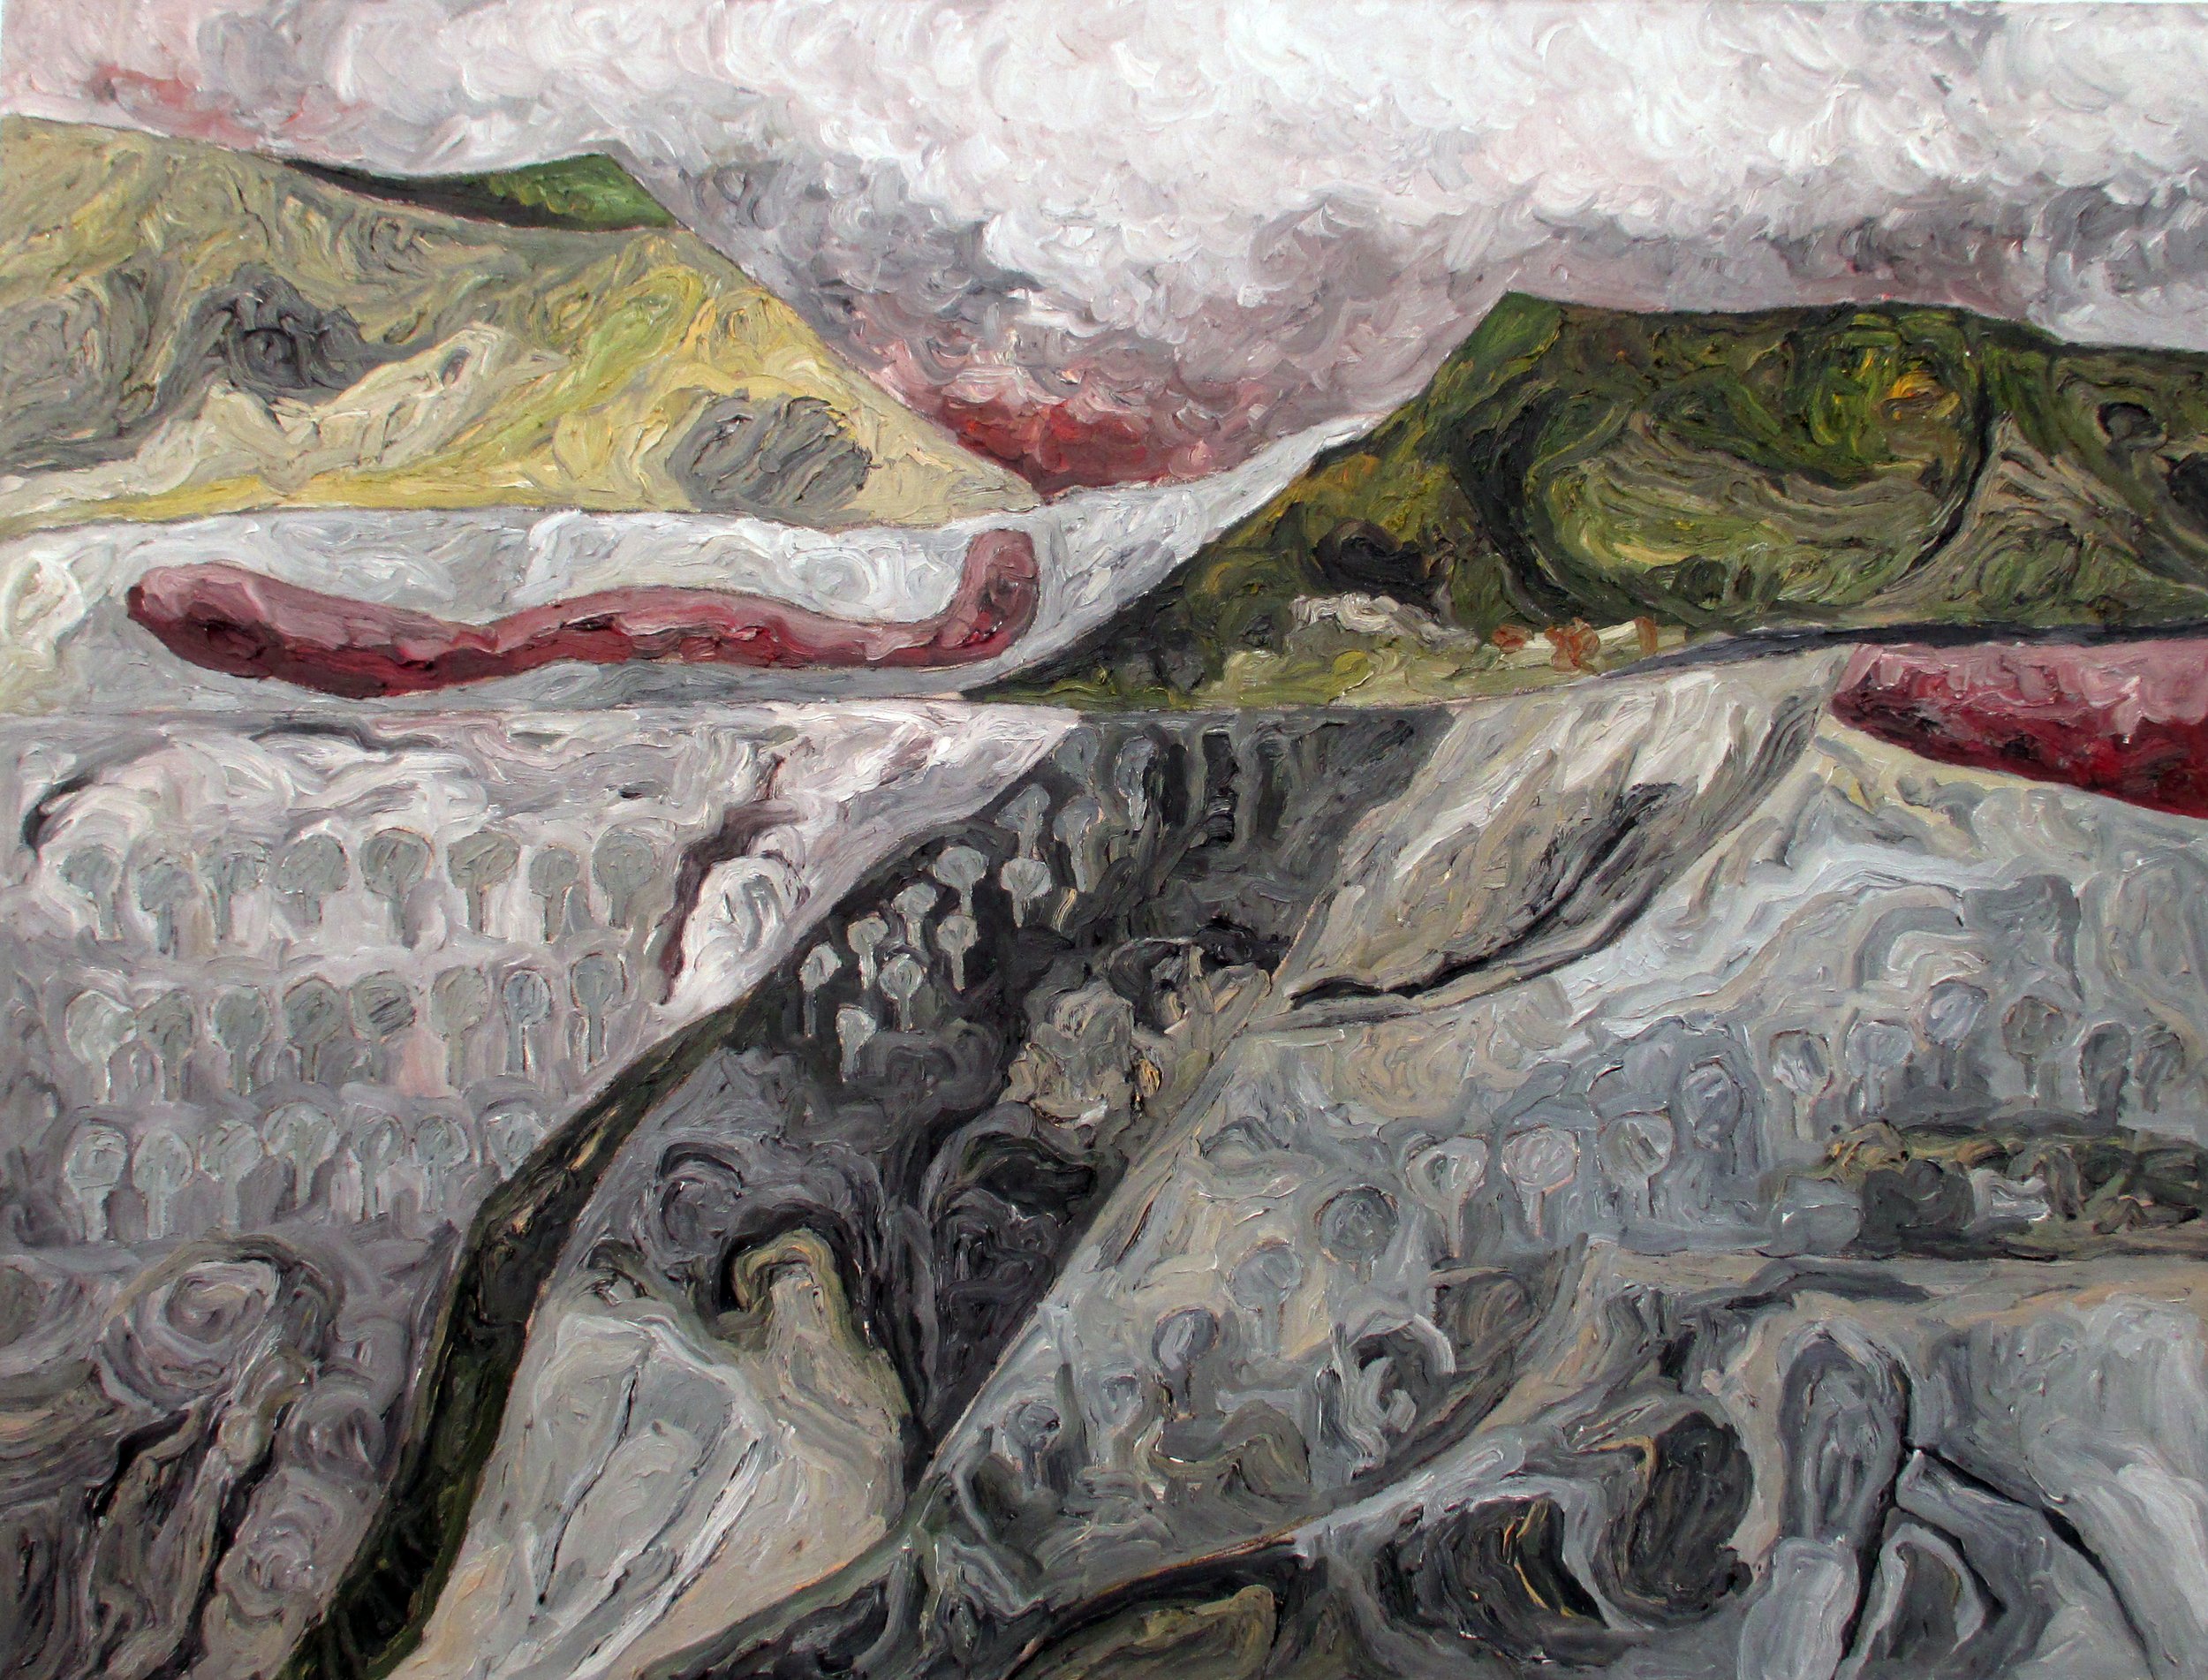  James Kuiper, “The Land Remembers,” 2006, oil on canvas, 42 1/2” x 55 3/4”  